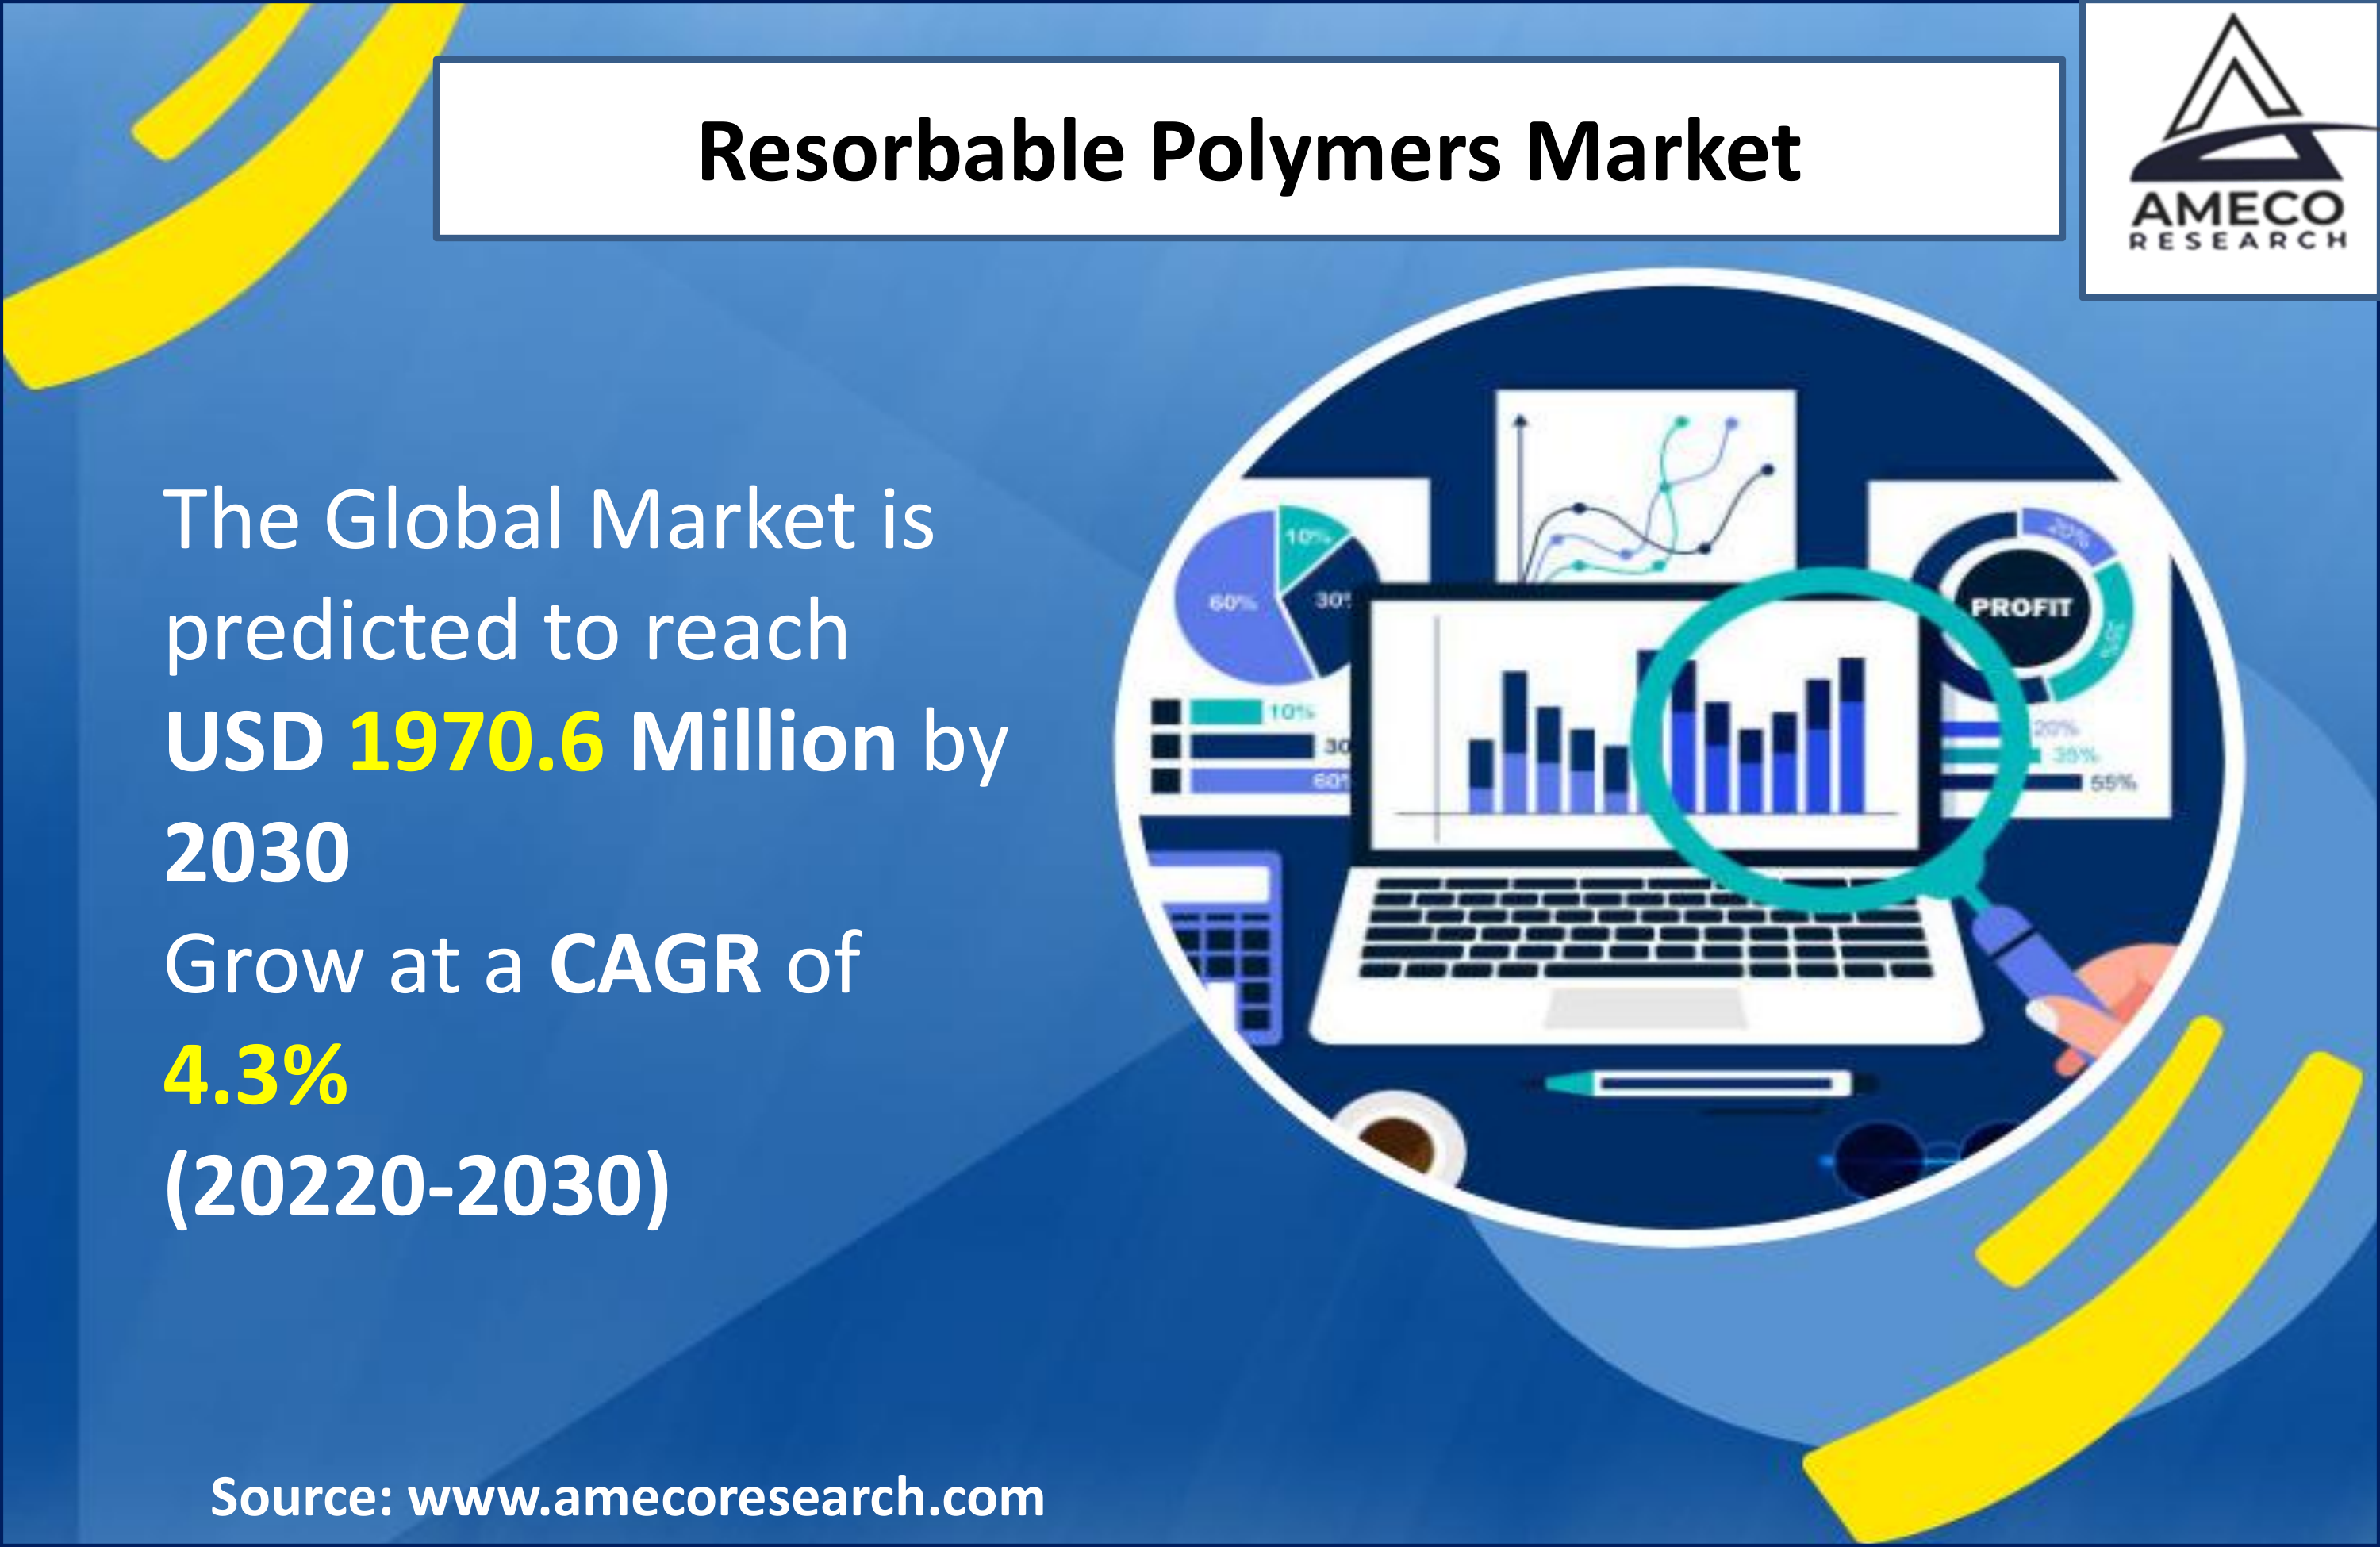 Resorbable Polymers Market